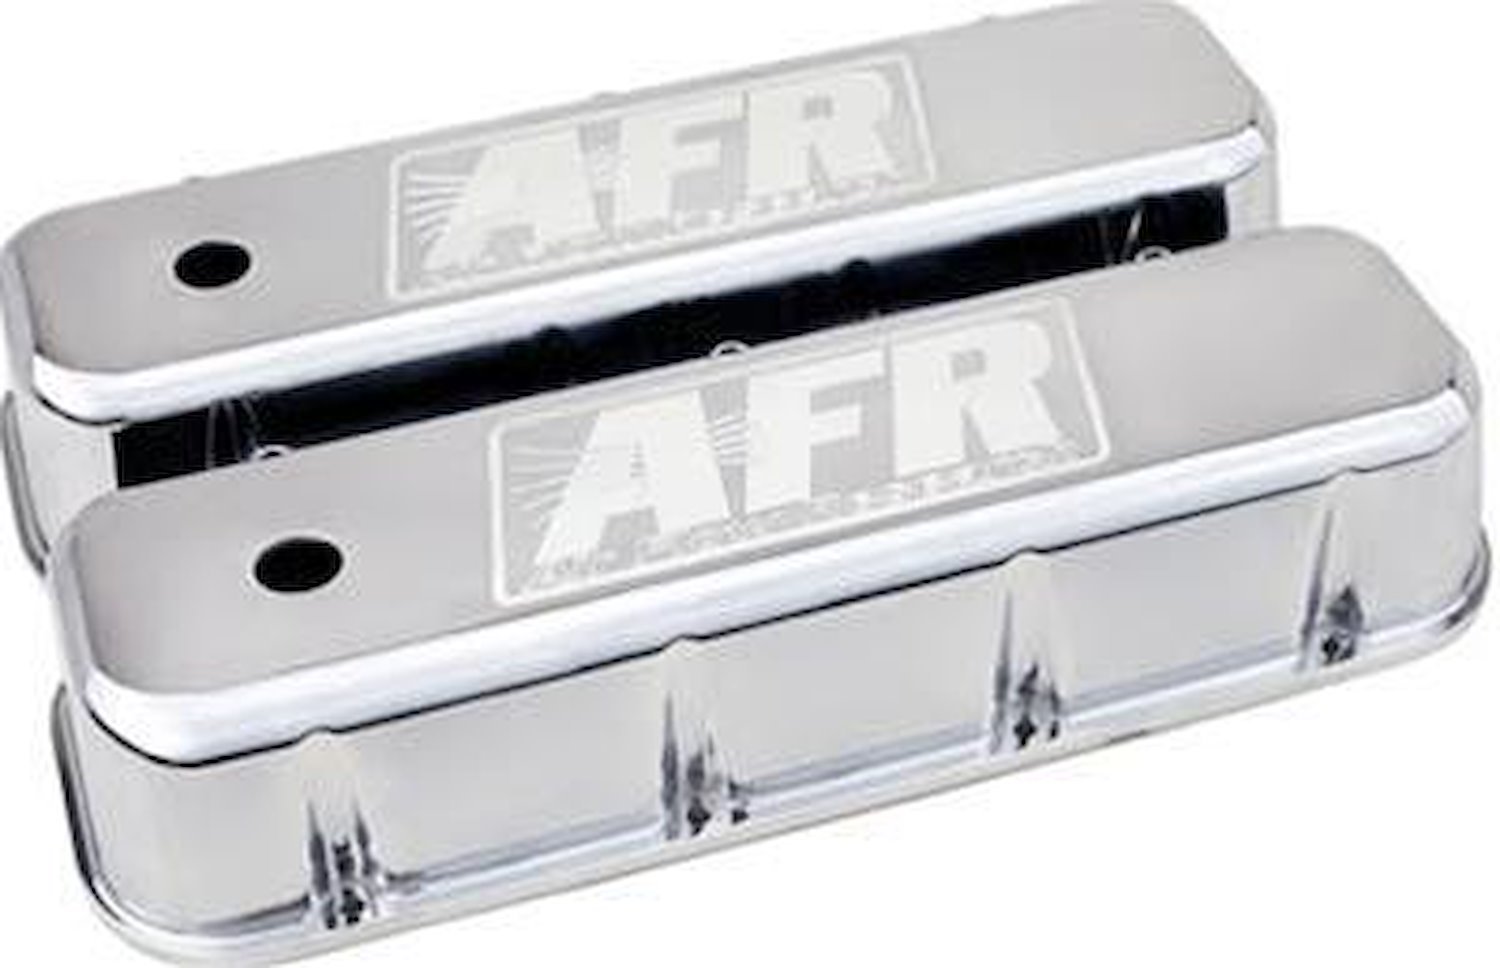 Cast Aluminum Tall Valve Covers for Big Block Chevy [Polished]